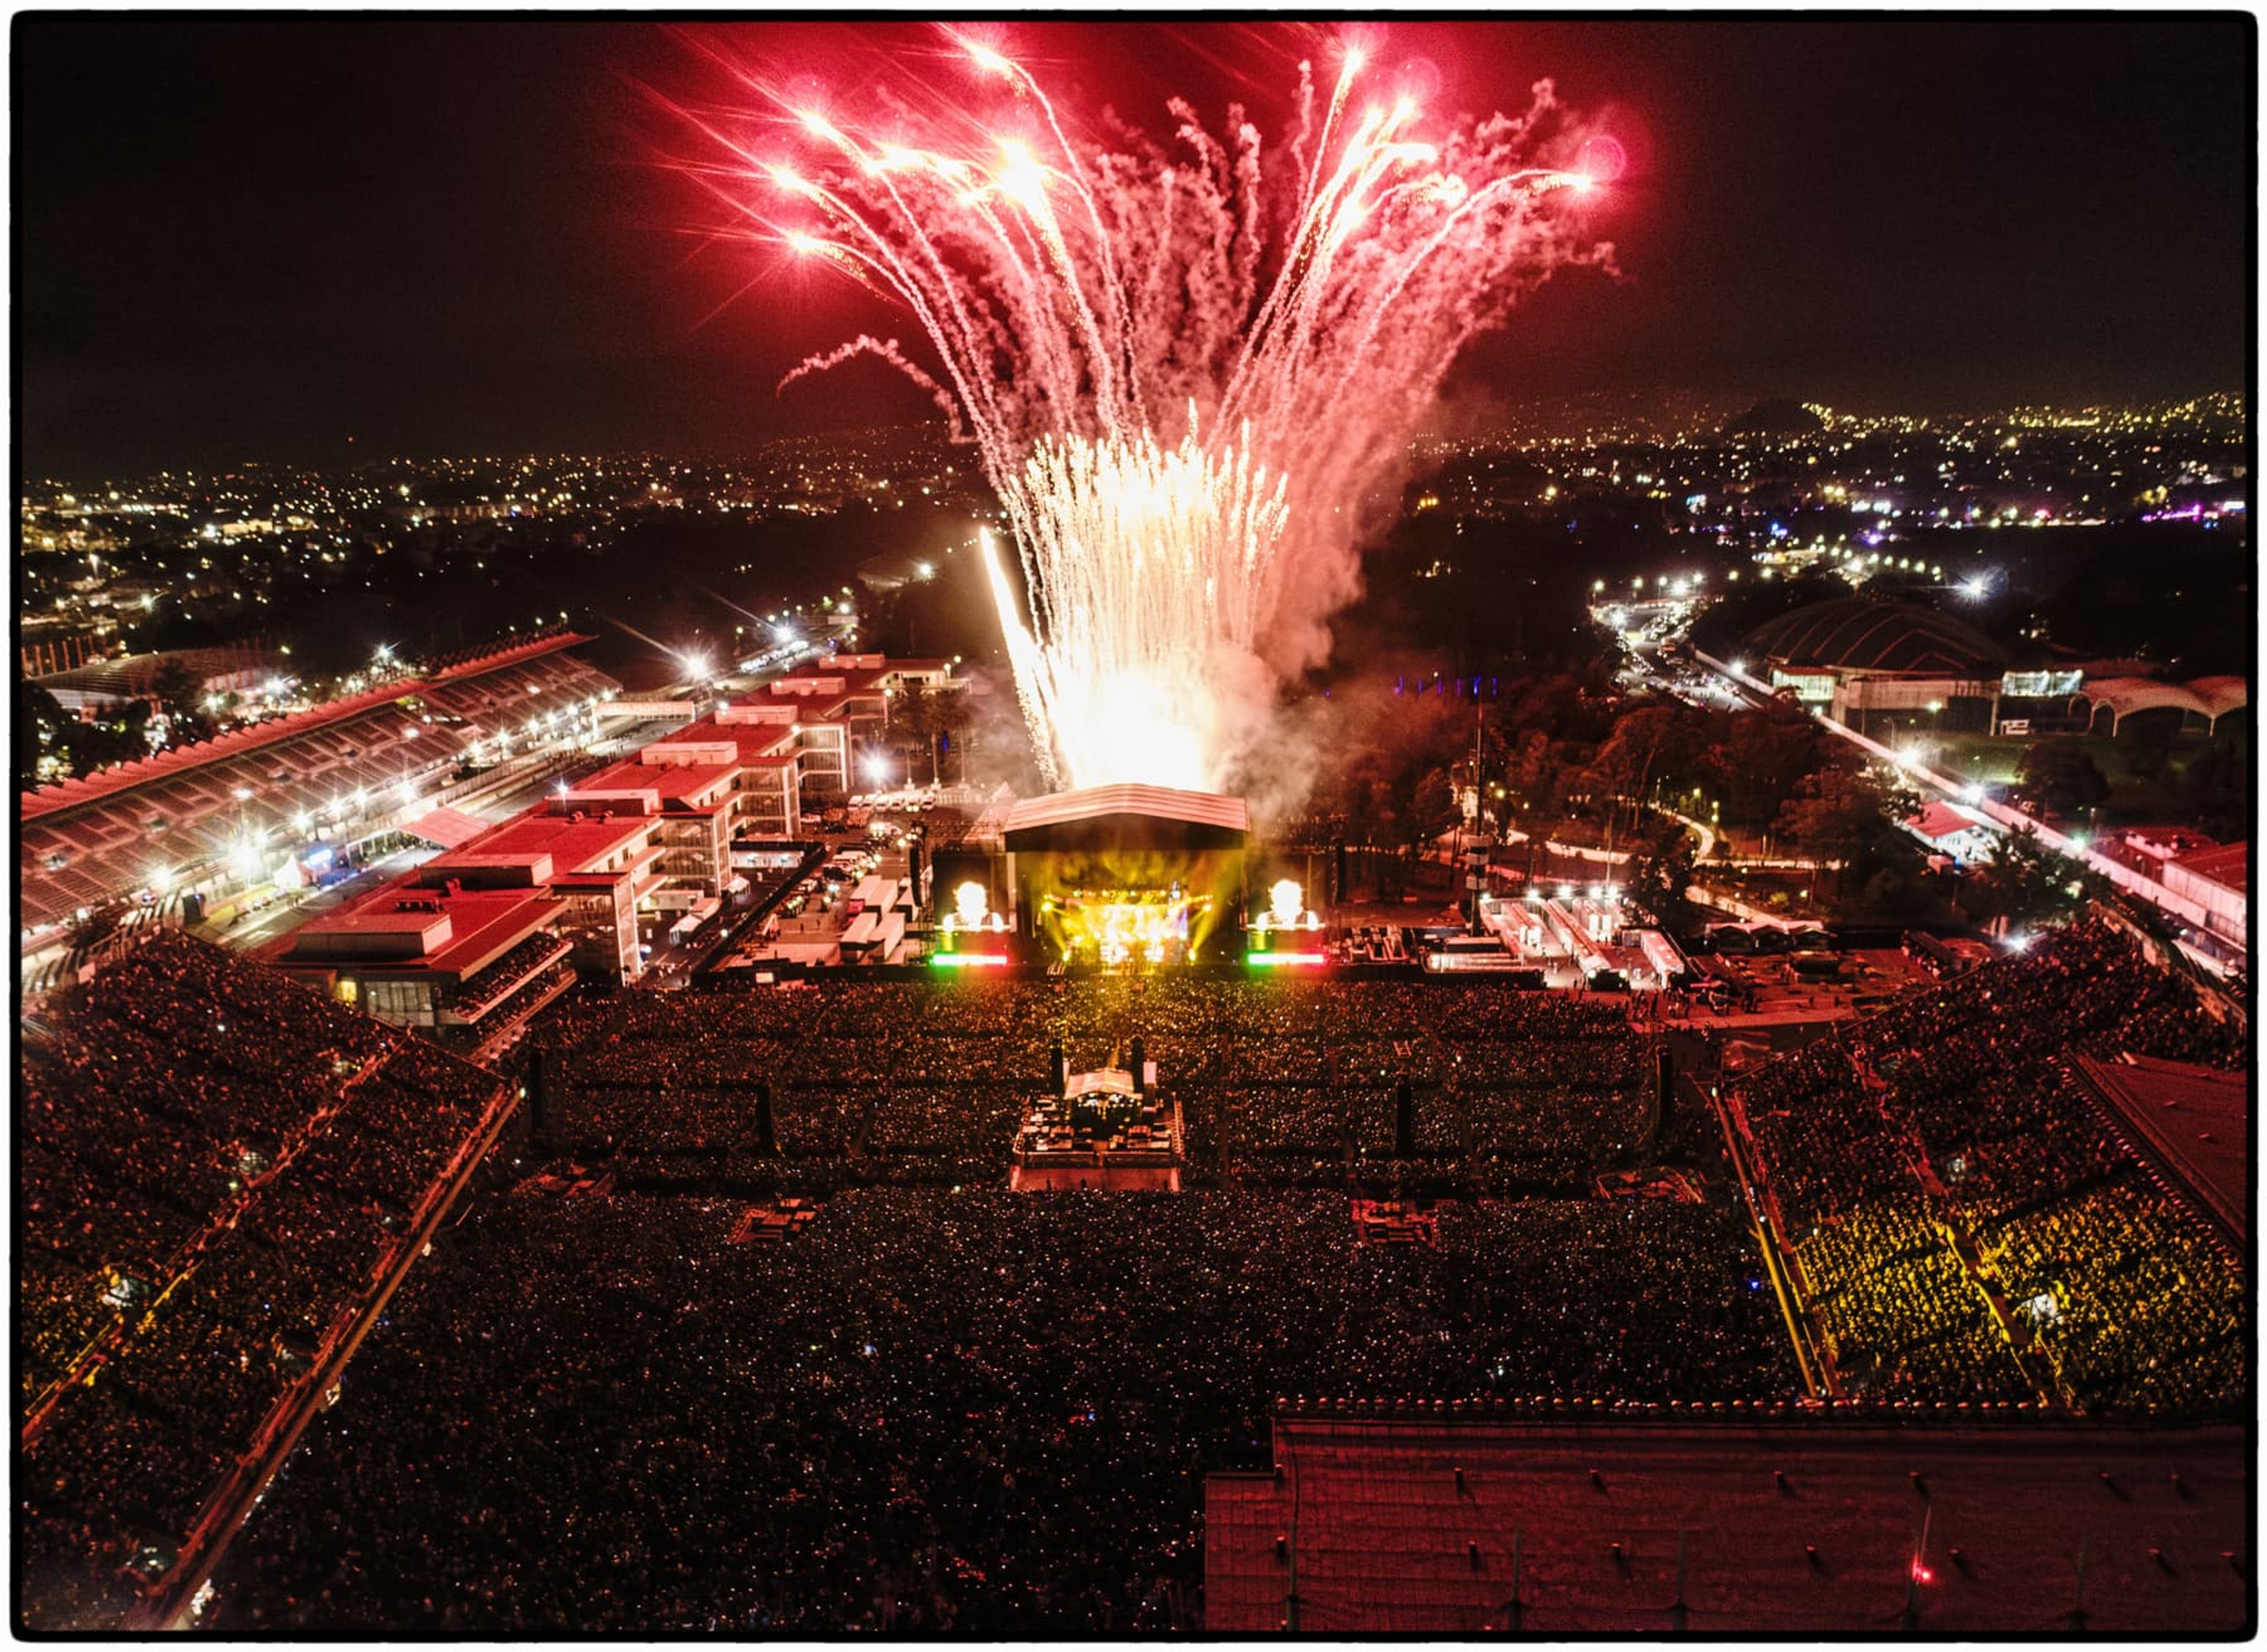 Photograph of the explosive finale of Paul's GOT BACK tour at Foro Sol in Mexico City